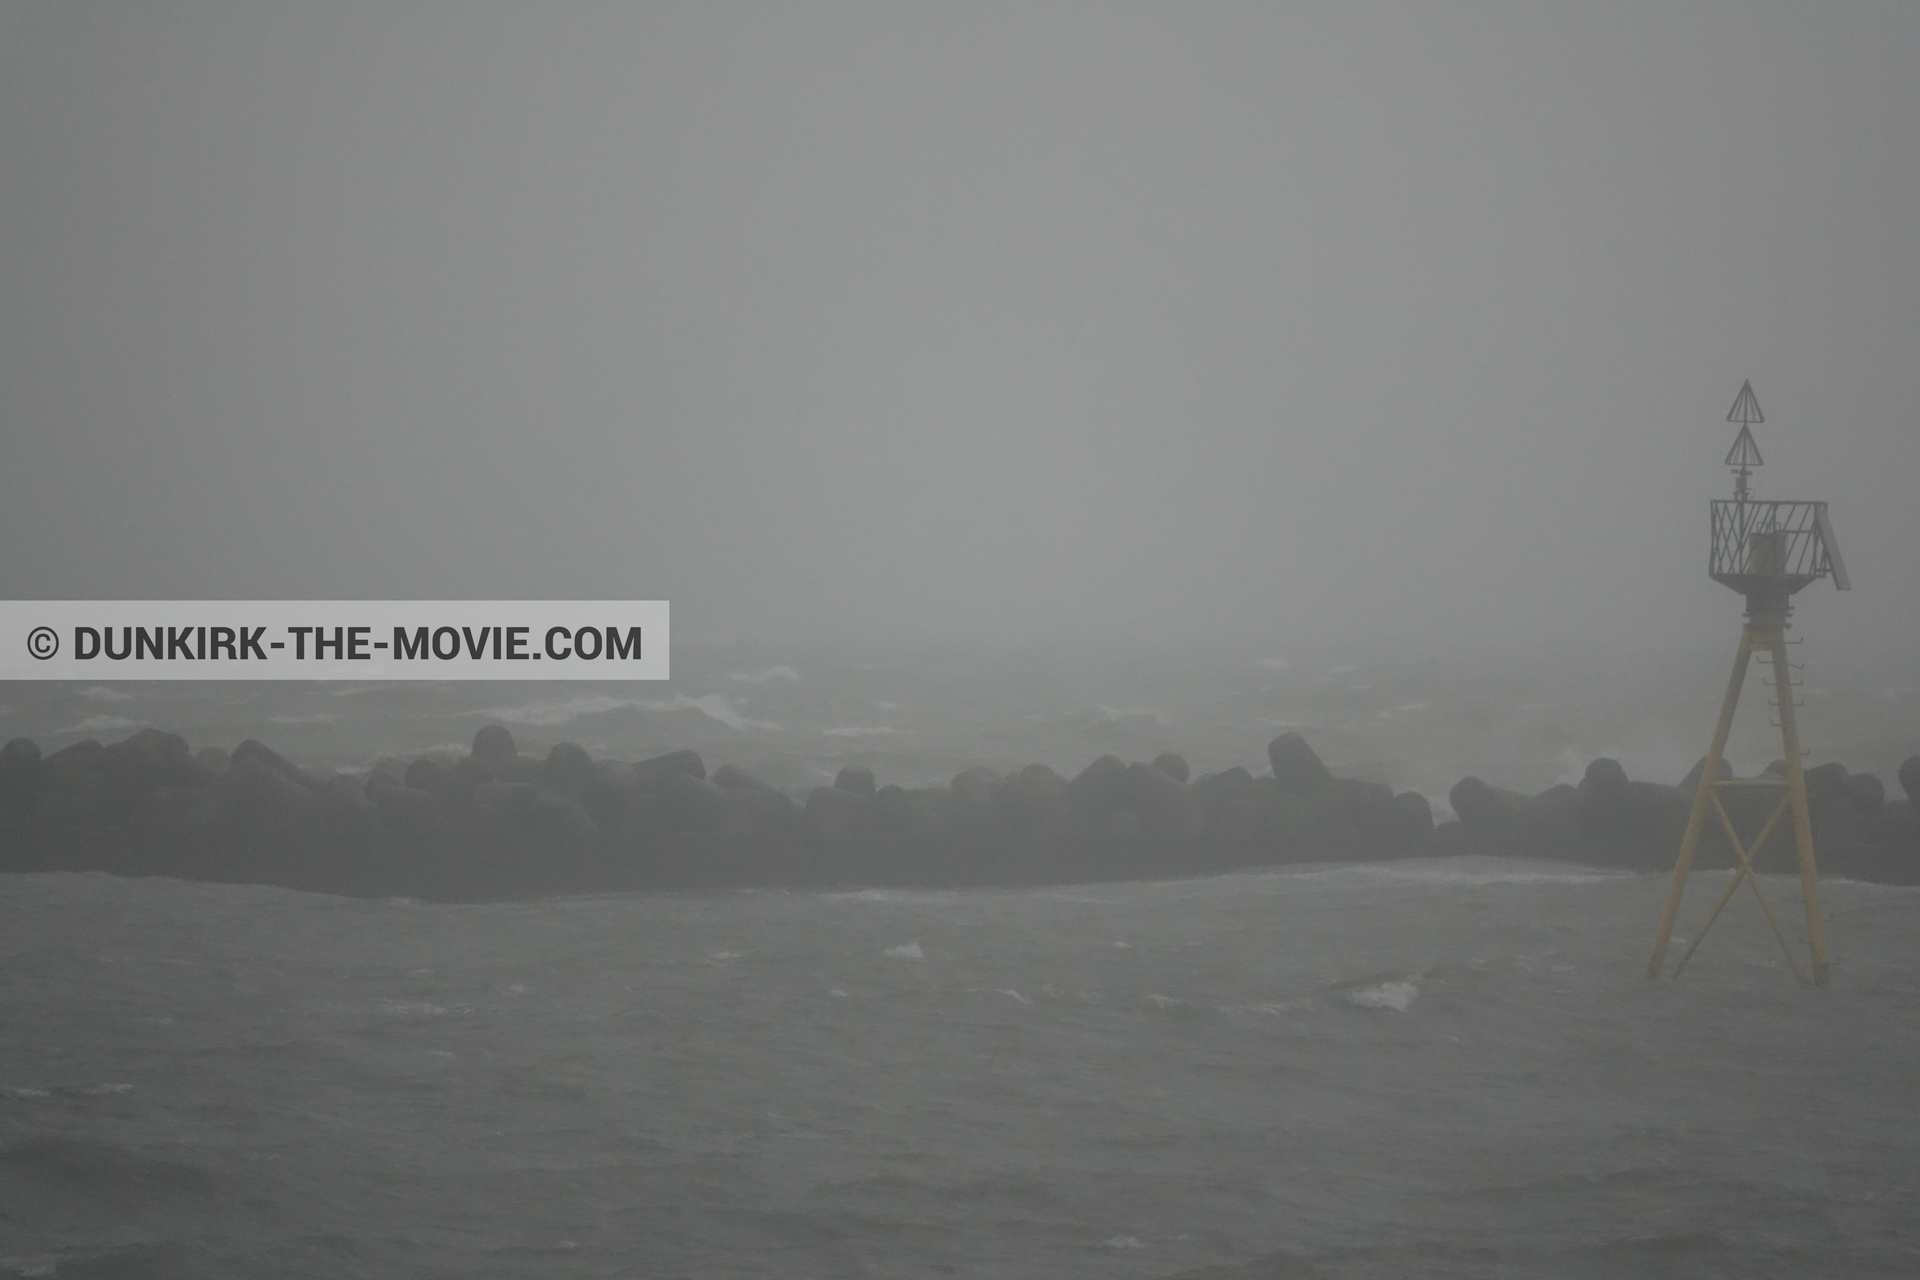 Picture with grey sky, EST pier, rough sea,  from behind the scene of the Dunkirk movie by Nolan